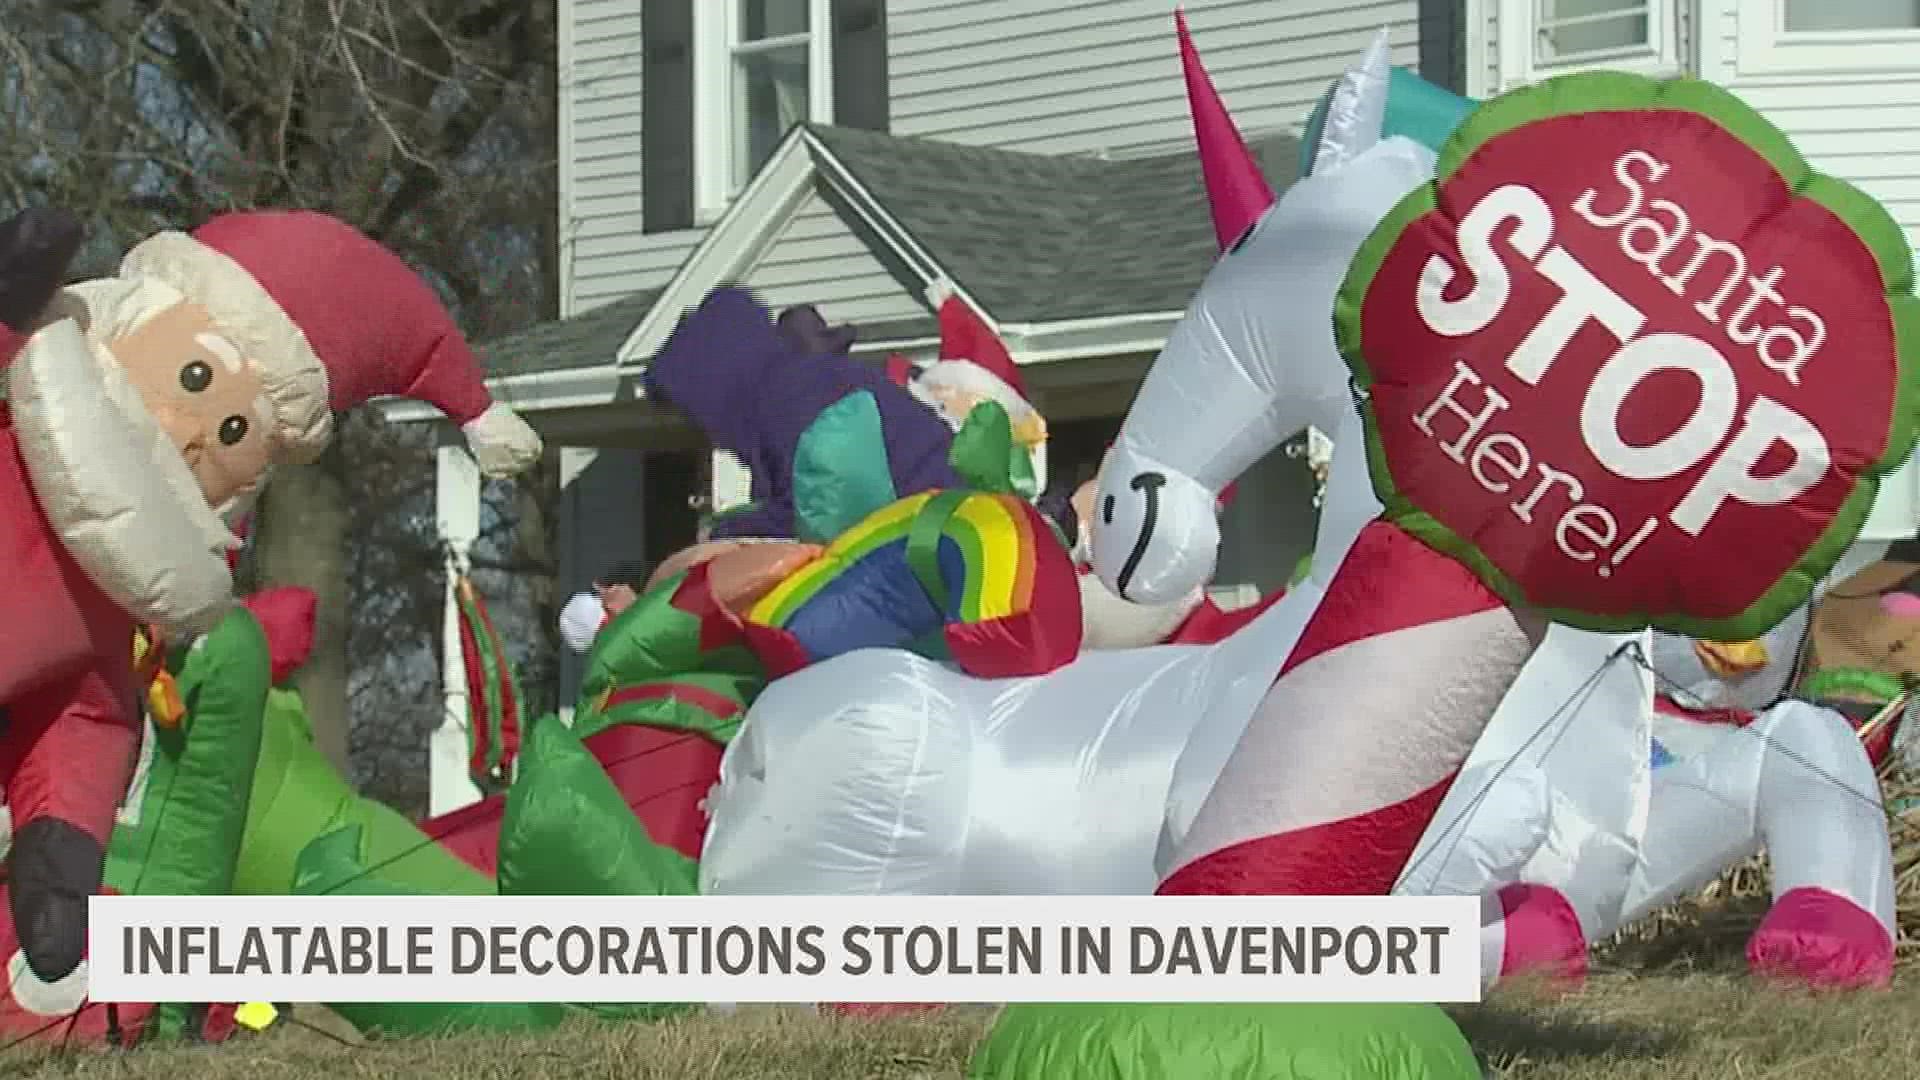 Connie Hart has been collecting inflatable decorations for nine years. For the first time, she had them stolen for her yard